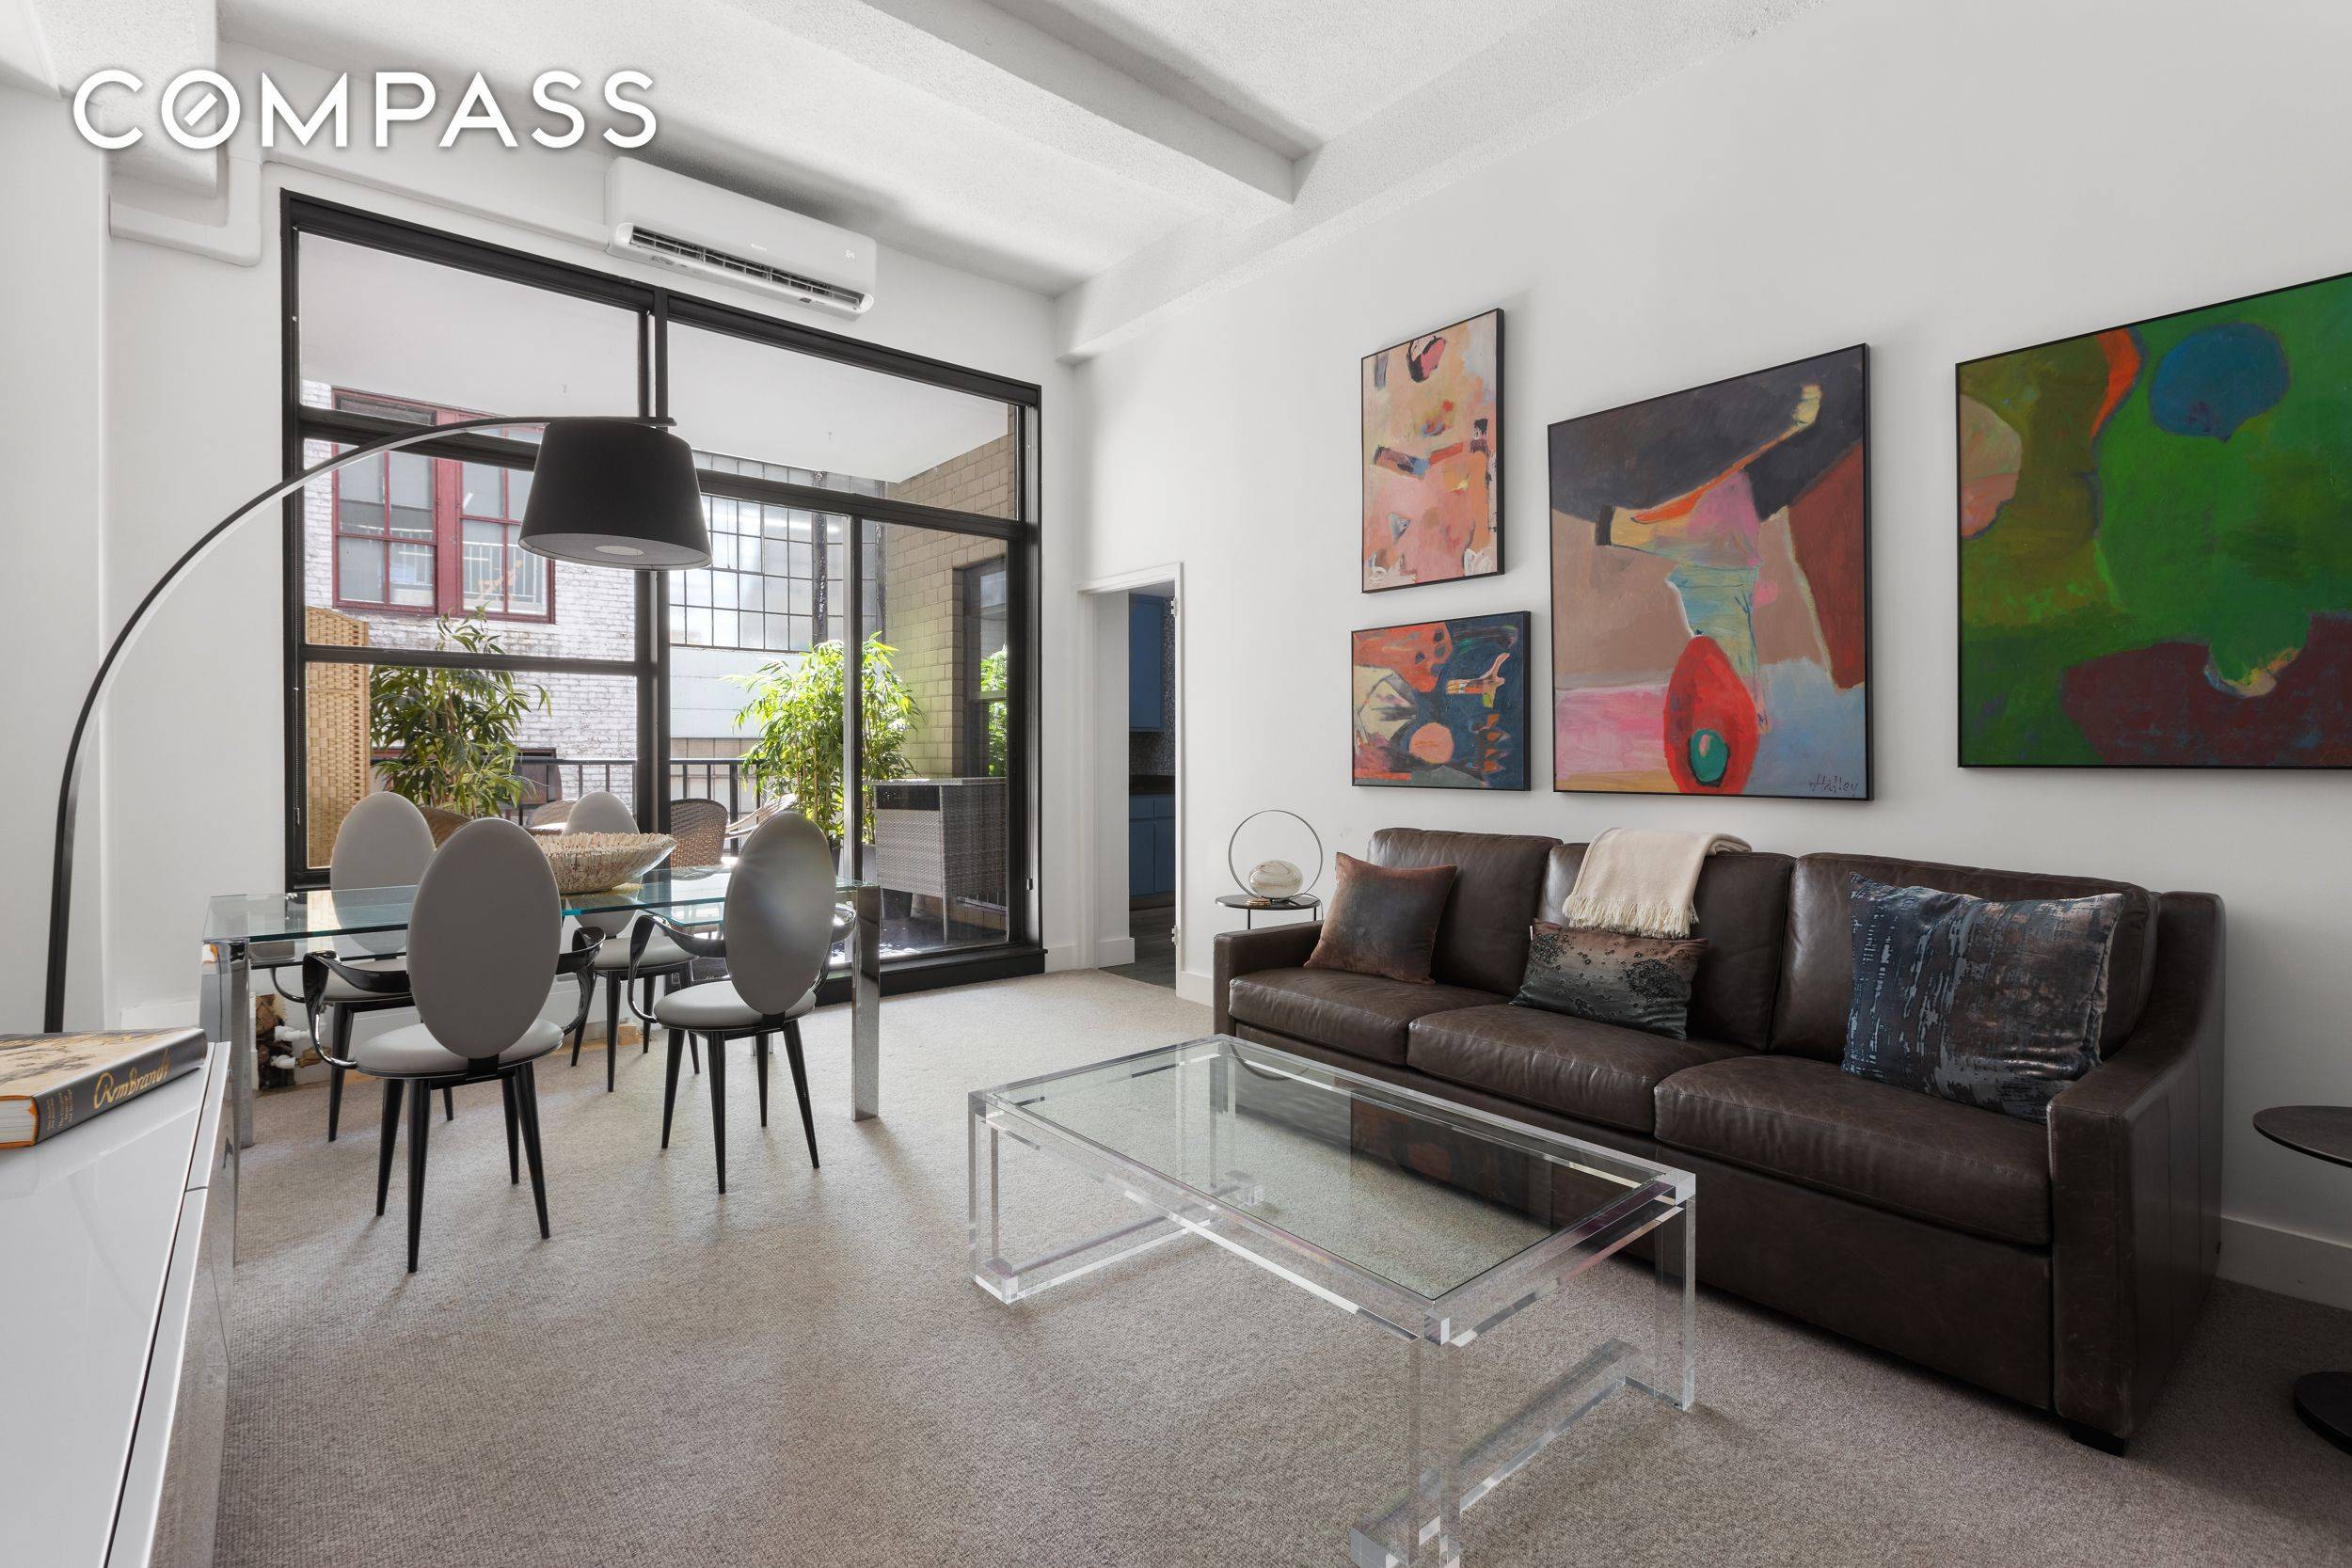 Tastefully renovated, this one bedroom home has it all 12 6 beamed ceilings, a private terrace, and a large living room with plenty of space for separate entertaining and dining.